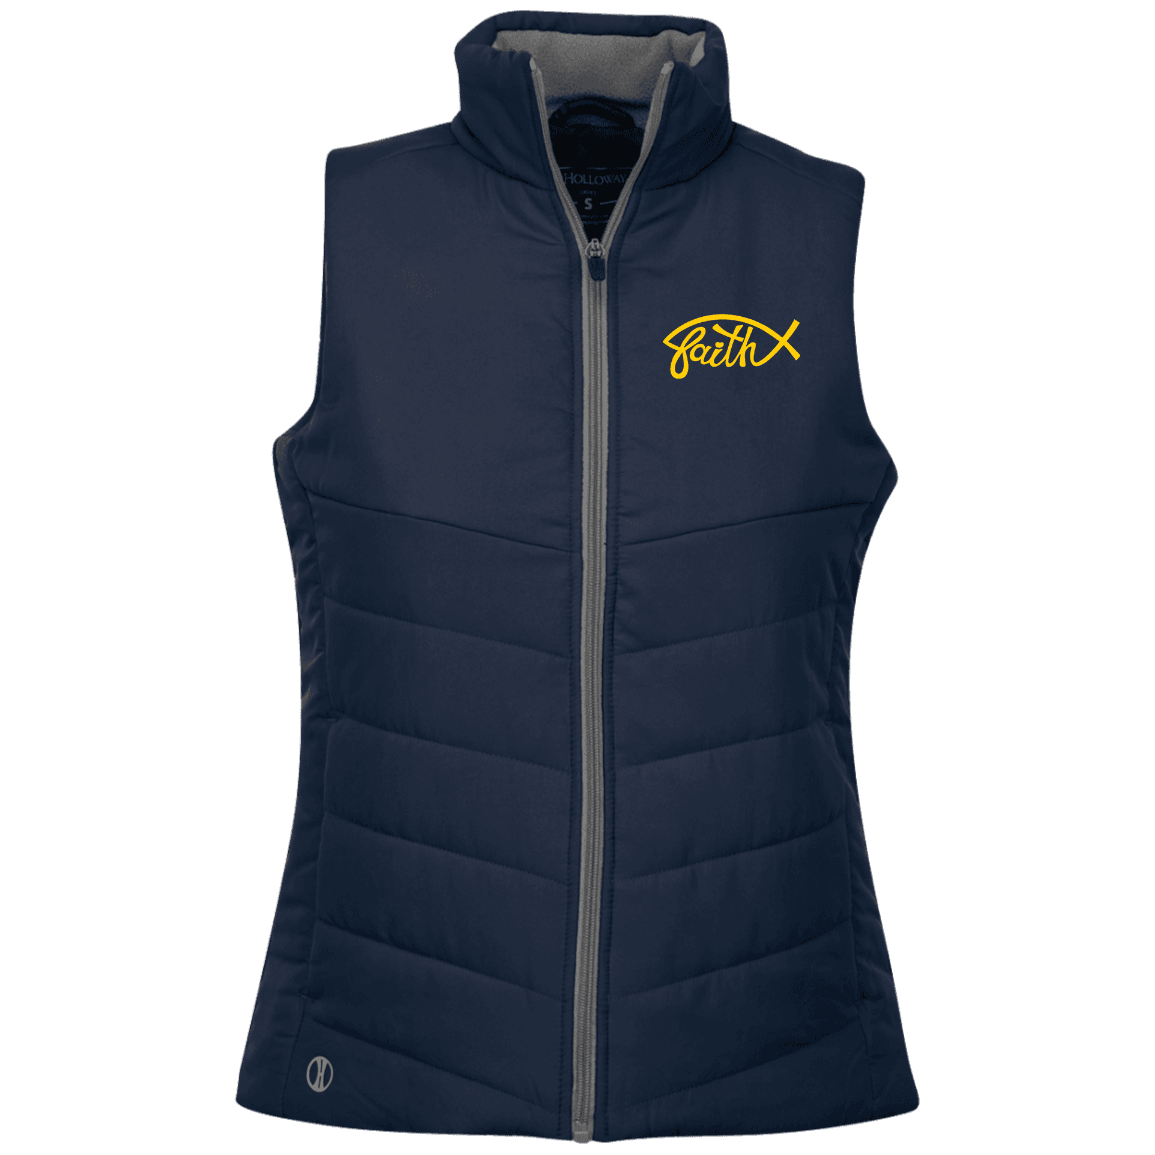 Designs by MyUtopia Shout Out:Faith Fish Embroidered Holloway Ladies' Quilted Vest - Navy Blue,Navy / X-Small,Jackets